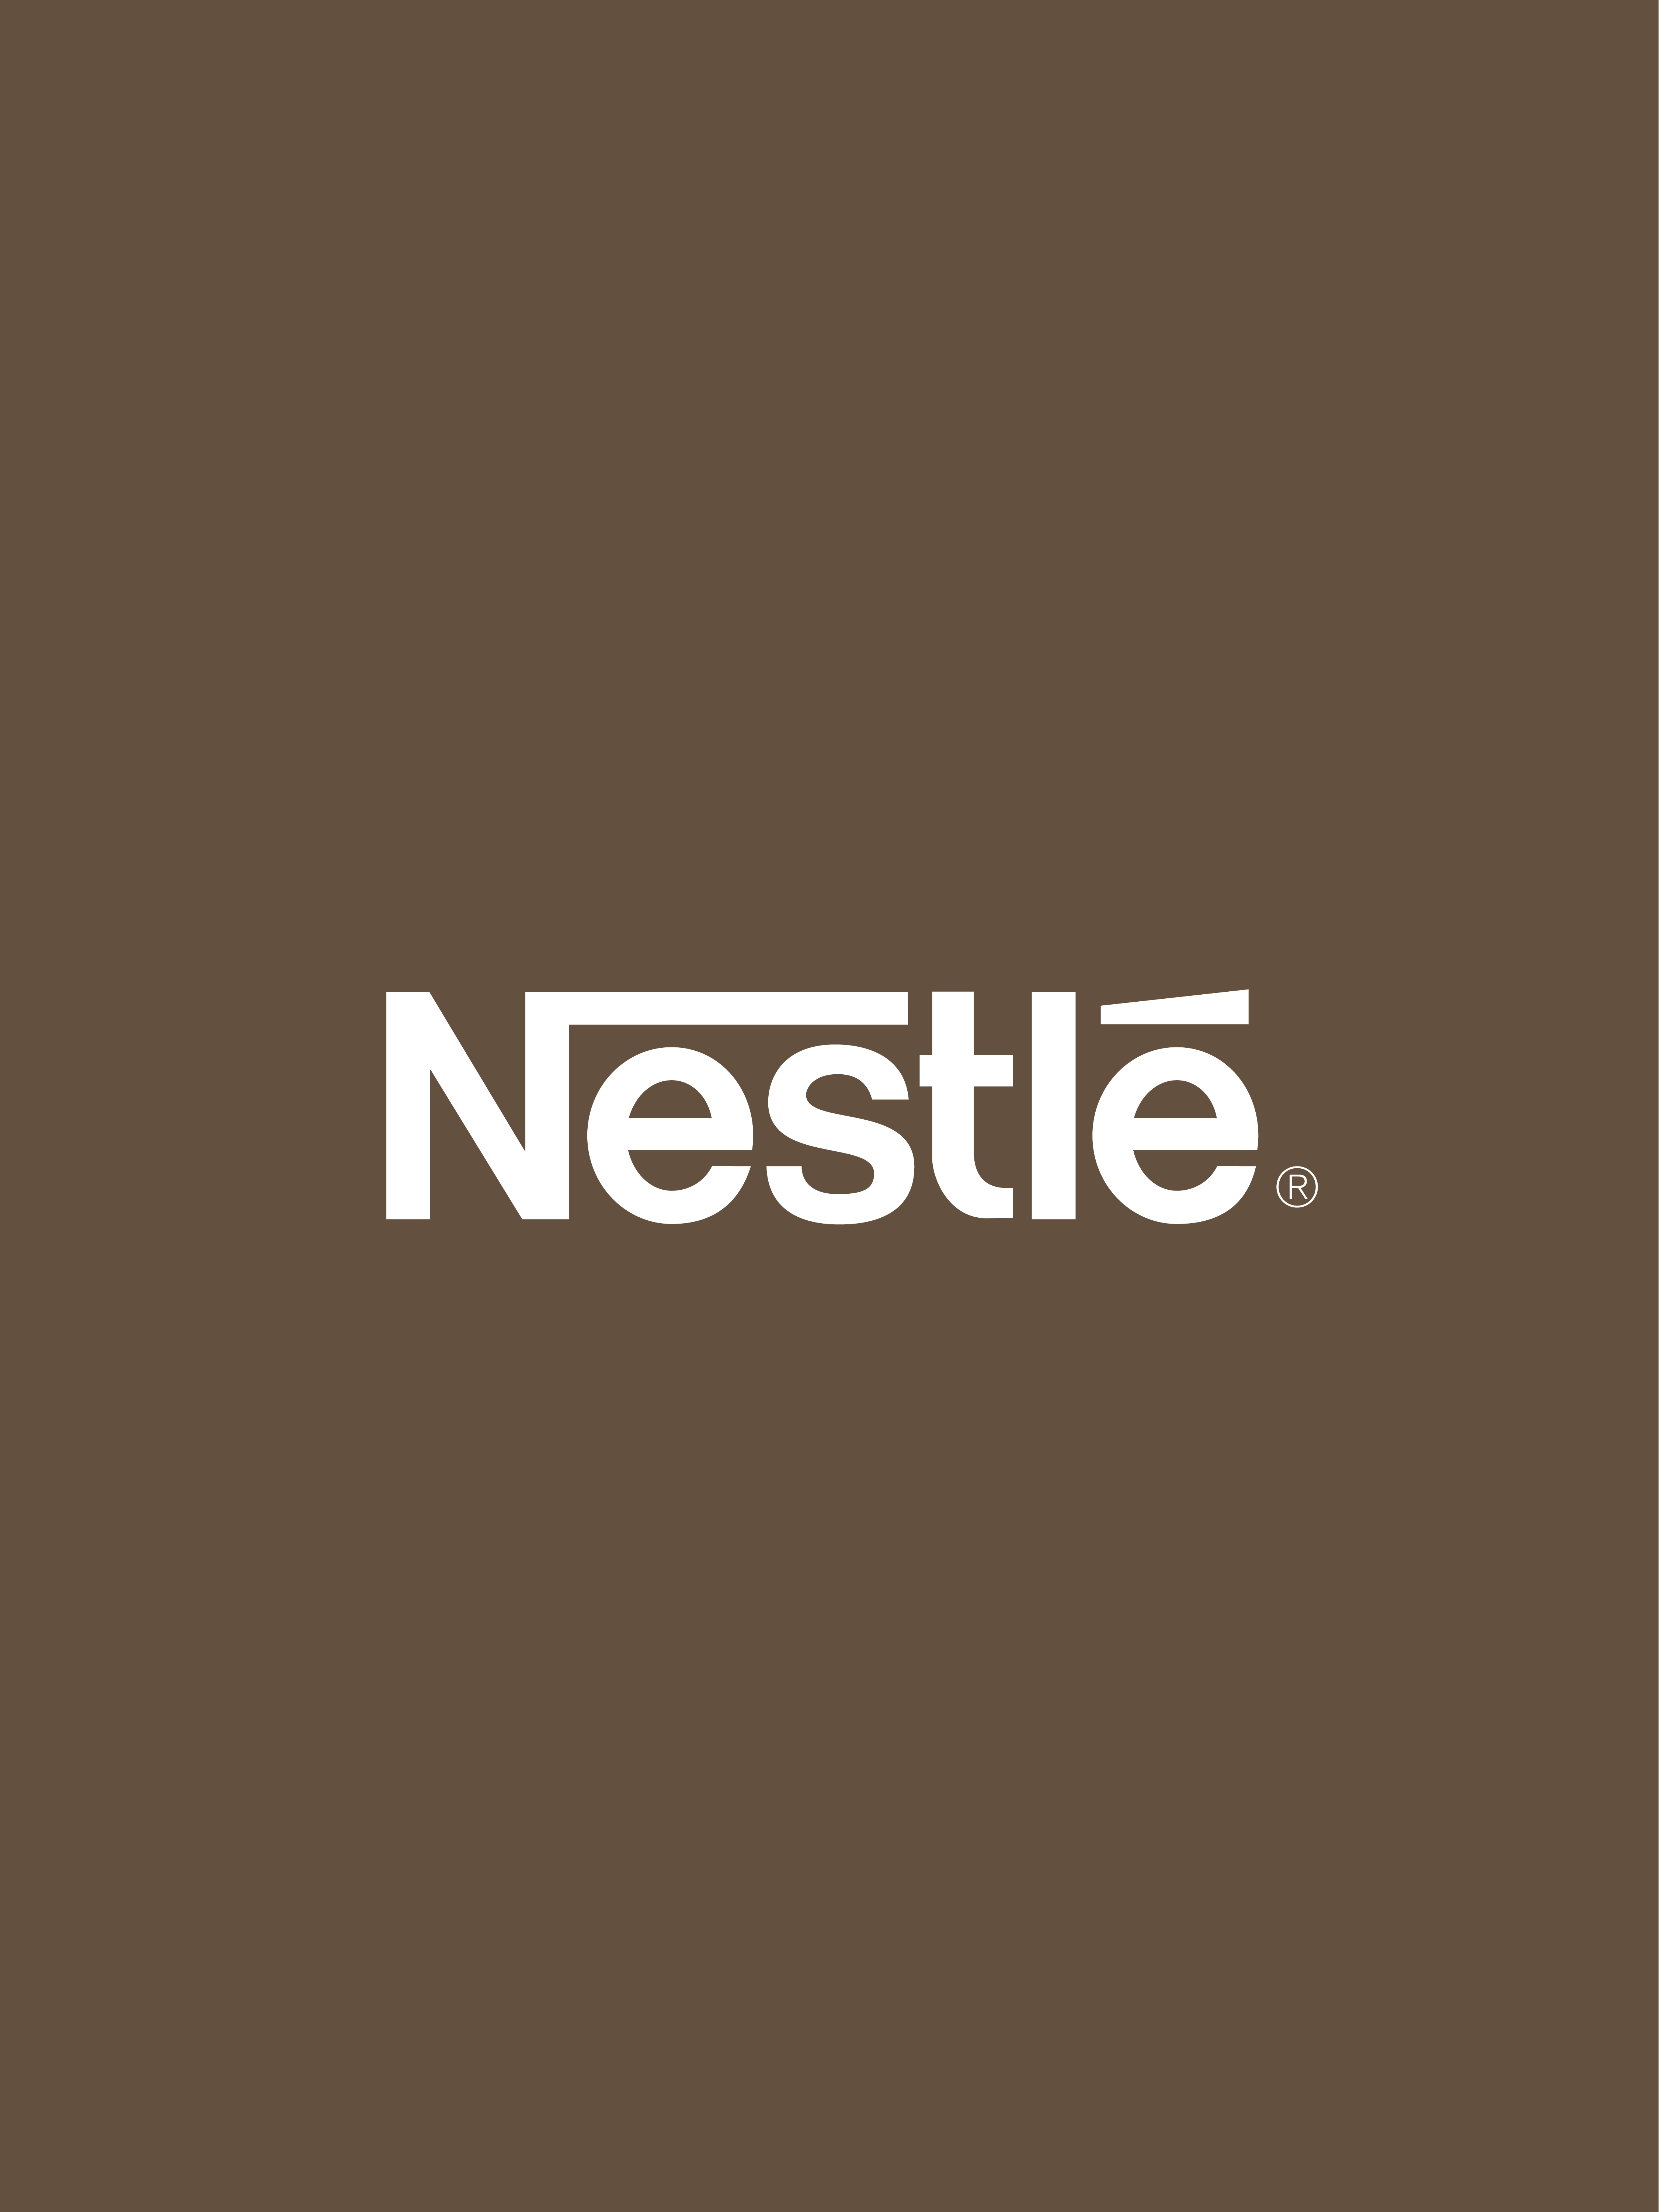 Mastering global brand building with Nestlé